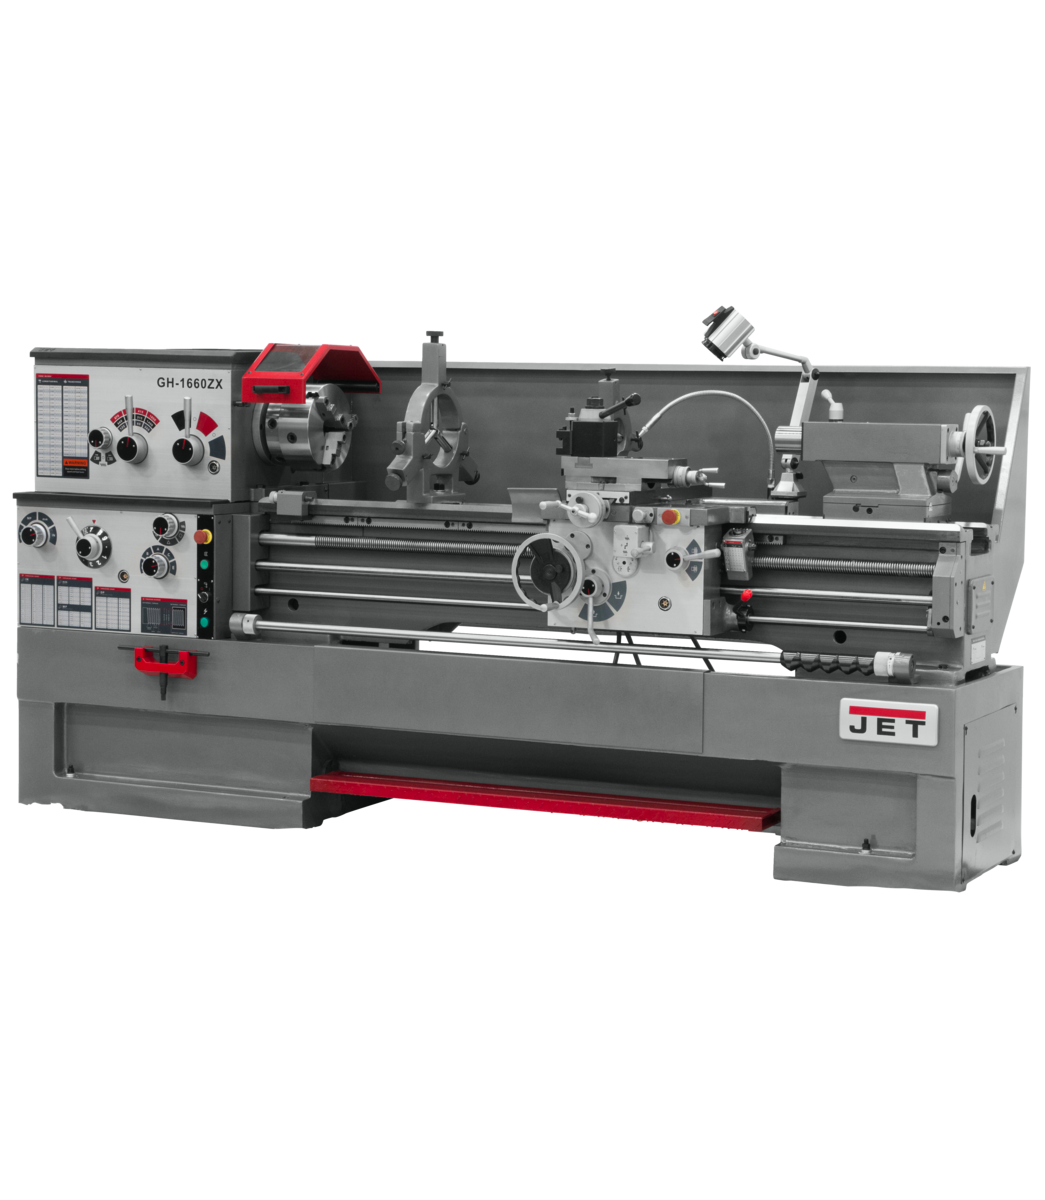 321463, GH-1860ZX , 18" Swing, 60" Between Centers, GH-1860ZX With Taper Attachment and Collet Closer installed, Jet, Metalworking, Turning, Lathes